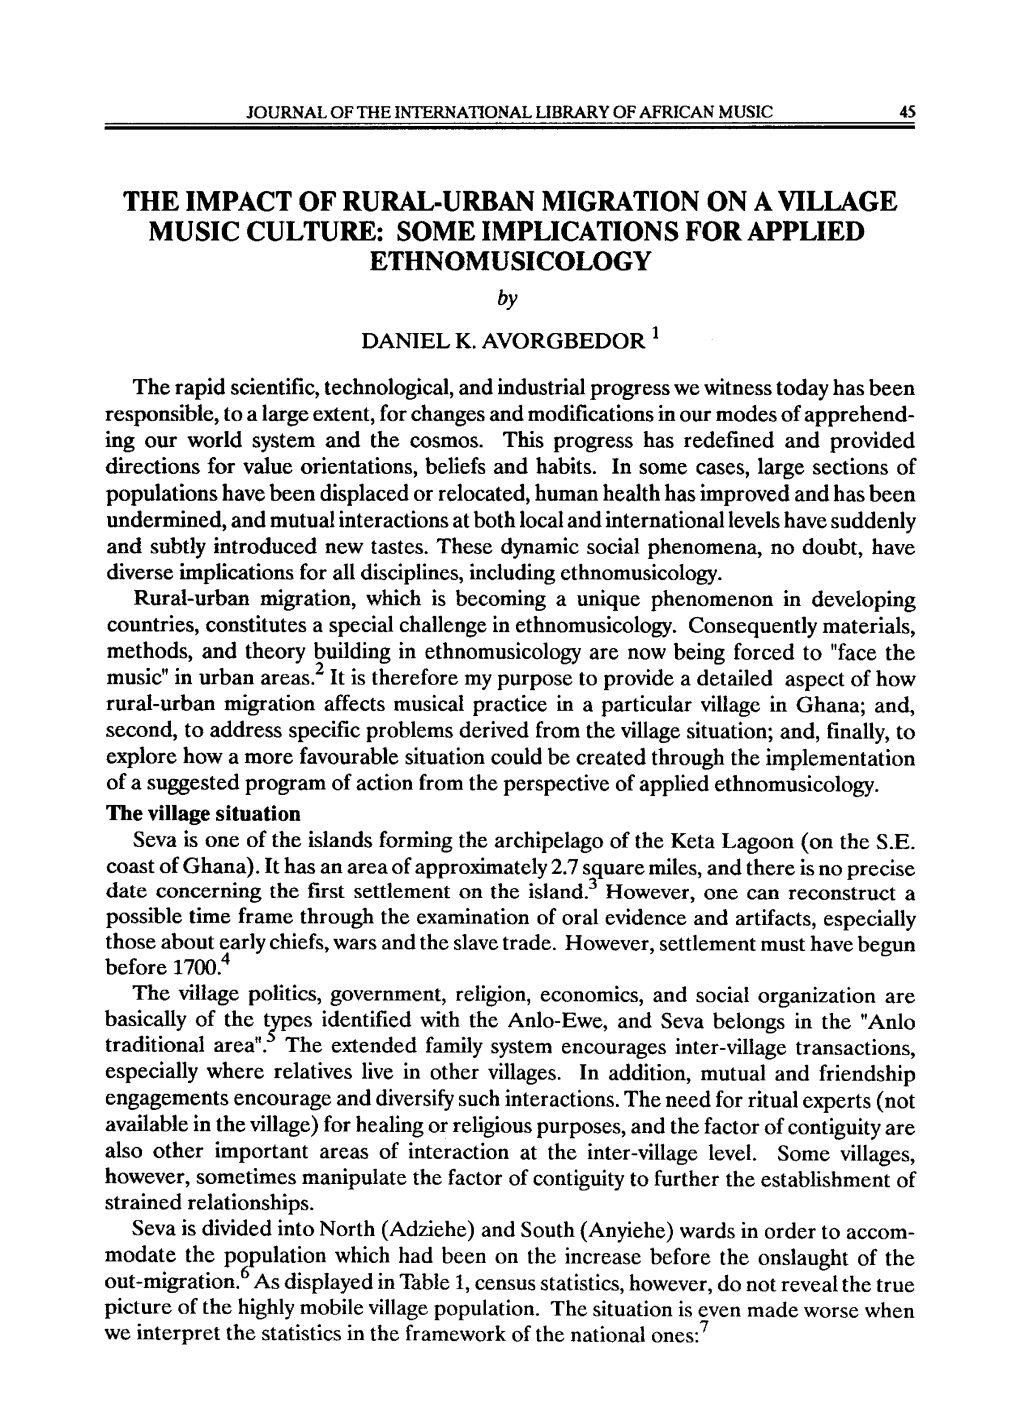 THE IMPACT of RURAL-URBAN MIGRATION on a VILLAGE MUSIC CULTURE: SOME IMPLICATIONS for APPLIED ETHNOMUSICOLOGY by DANIEL K